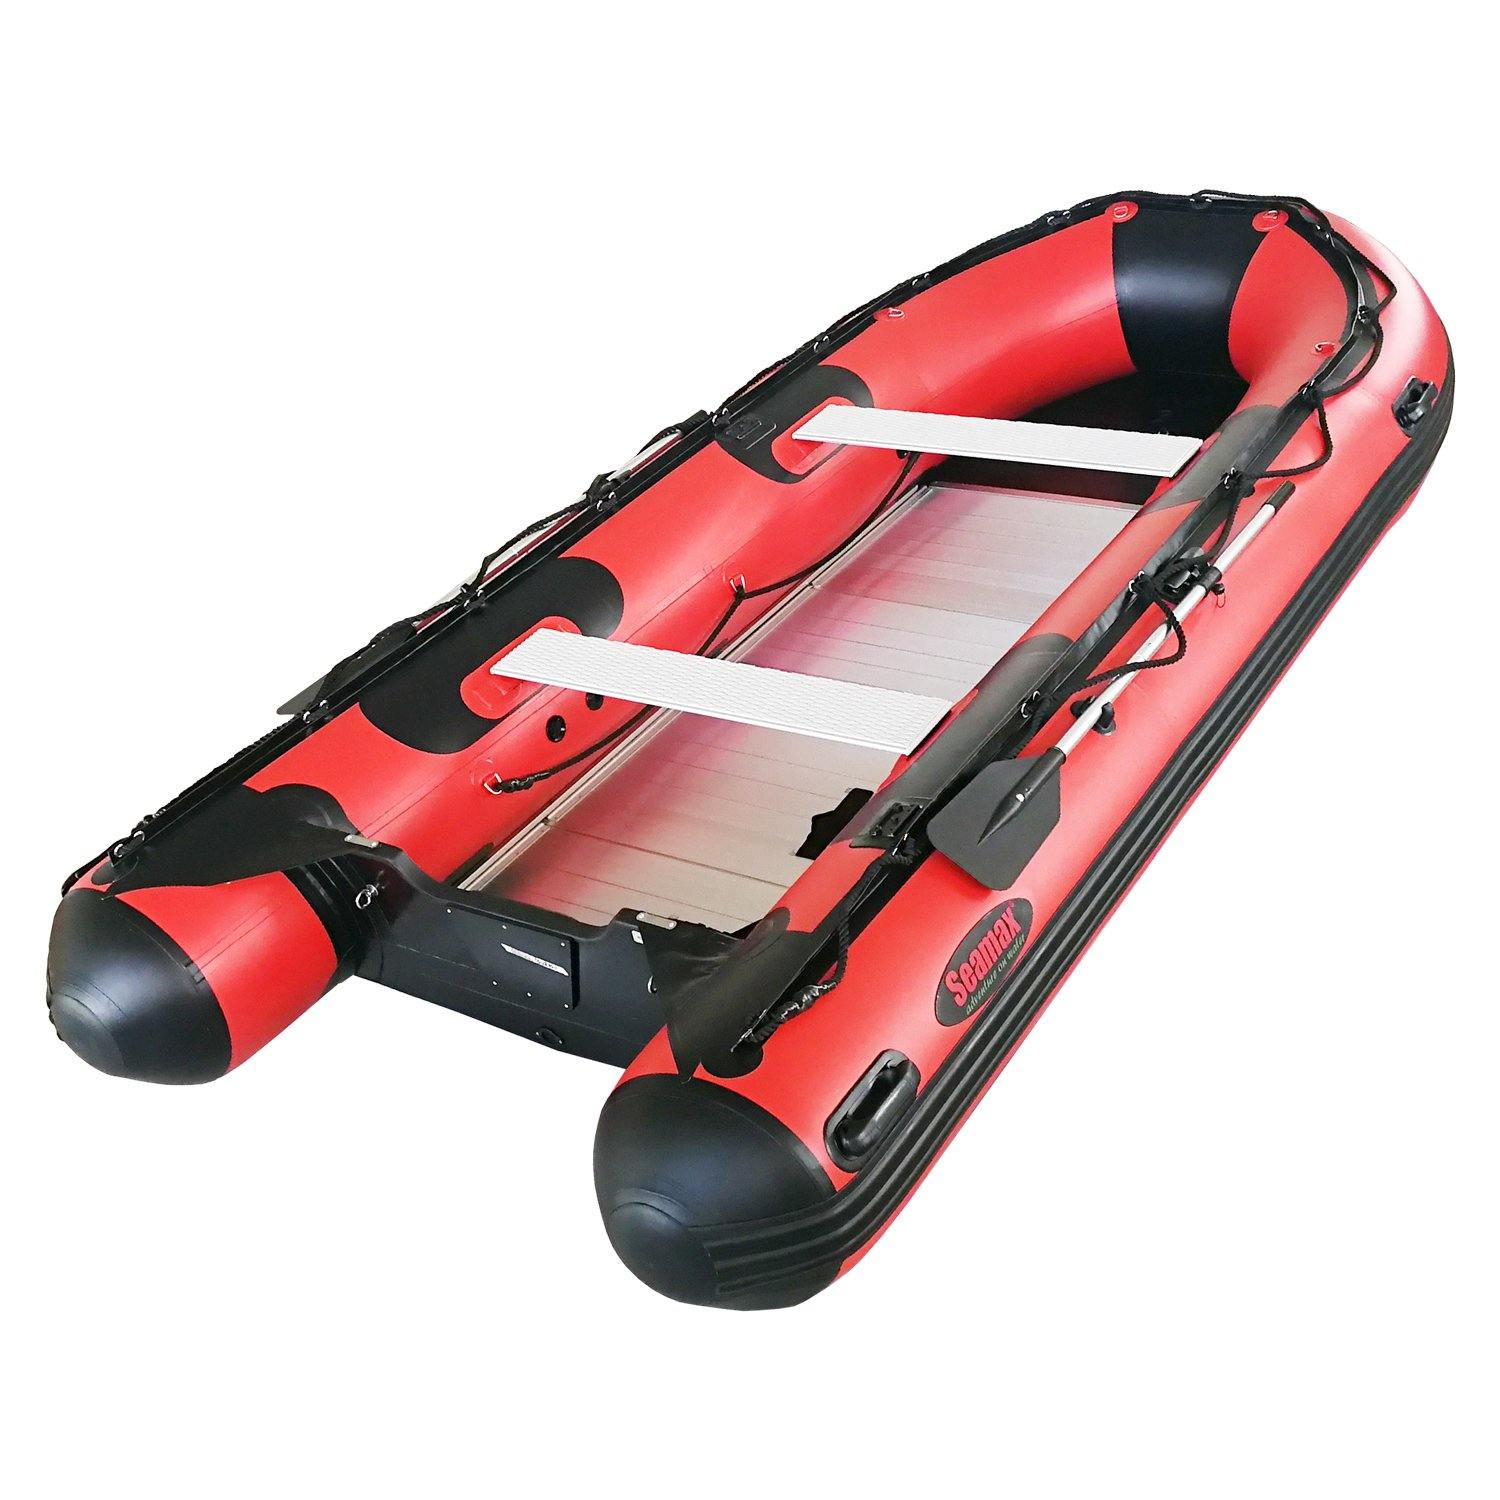 Seamax Recreational 14 Feet Inflatable Boat, Max 9 Passengers and 35HP Rated